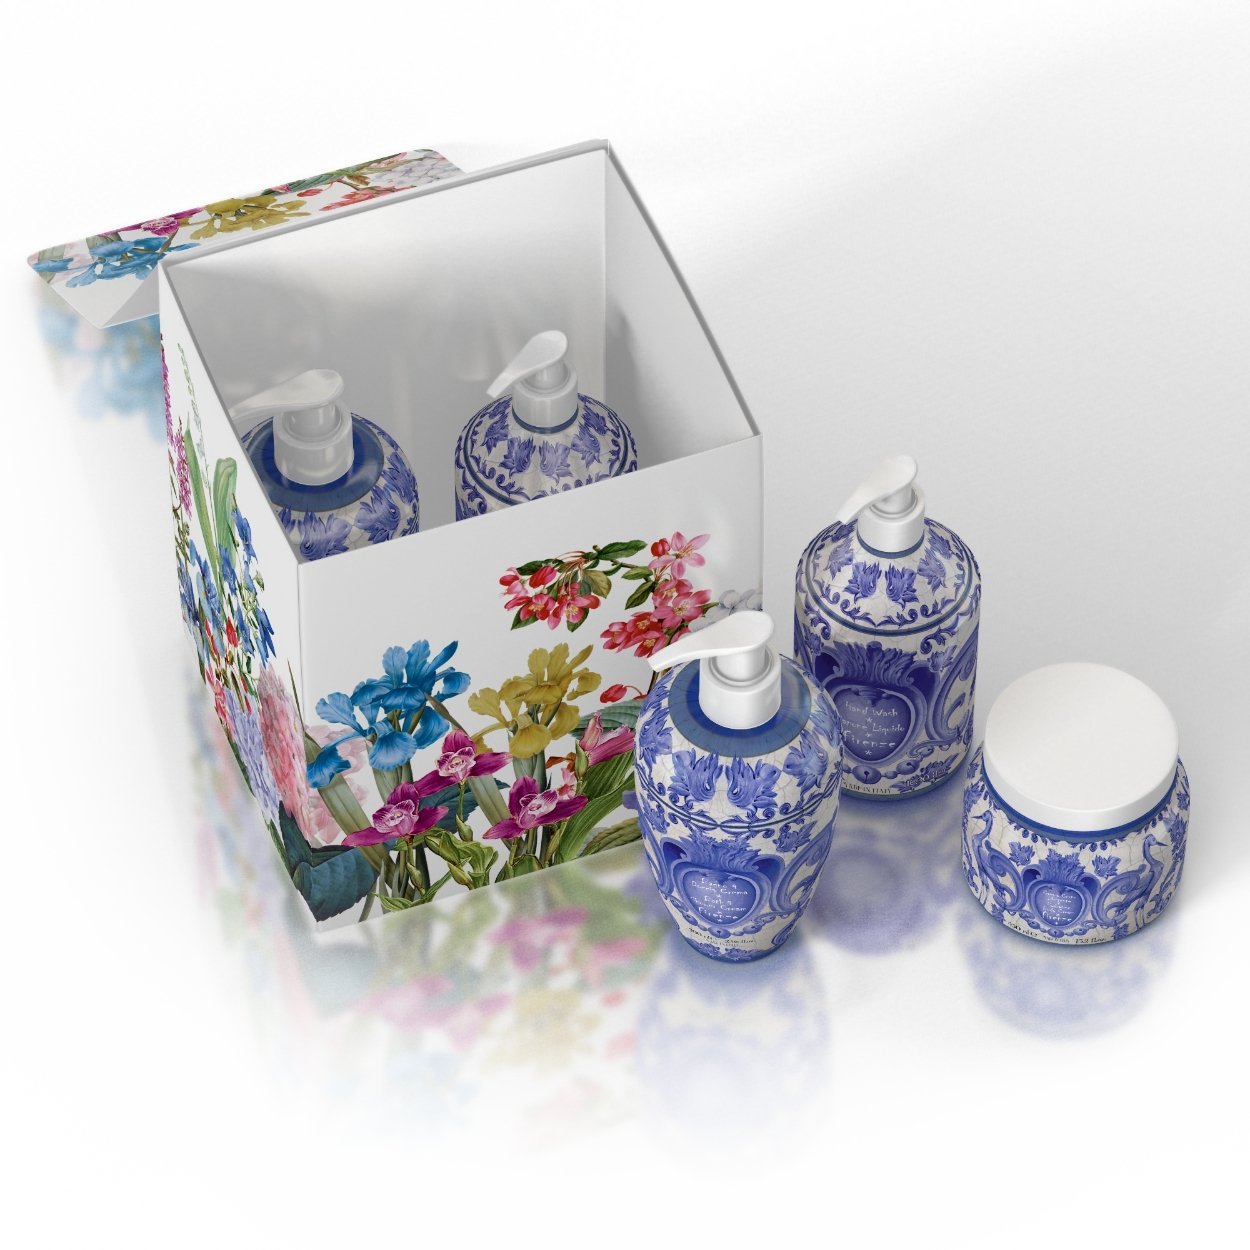 Gift Set - Firenze Body Art Edition by Rudy Profumi - |VESIMI Design| Luxury and Rustic bathrooms online